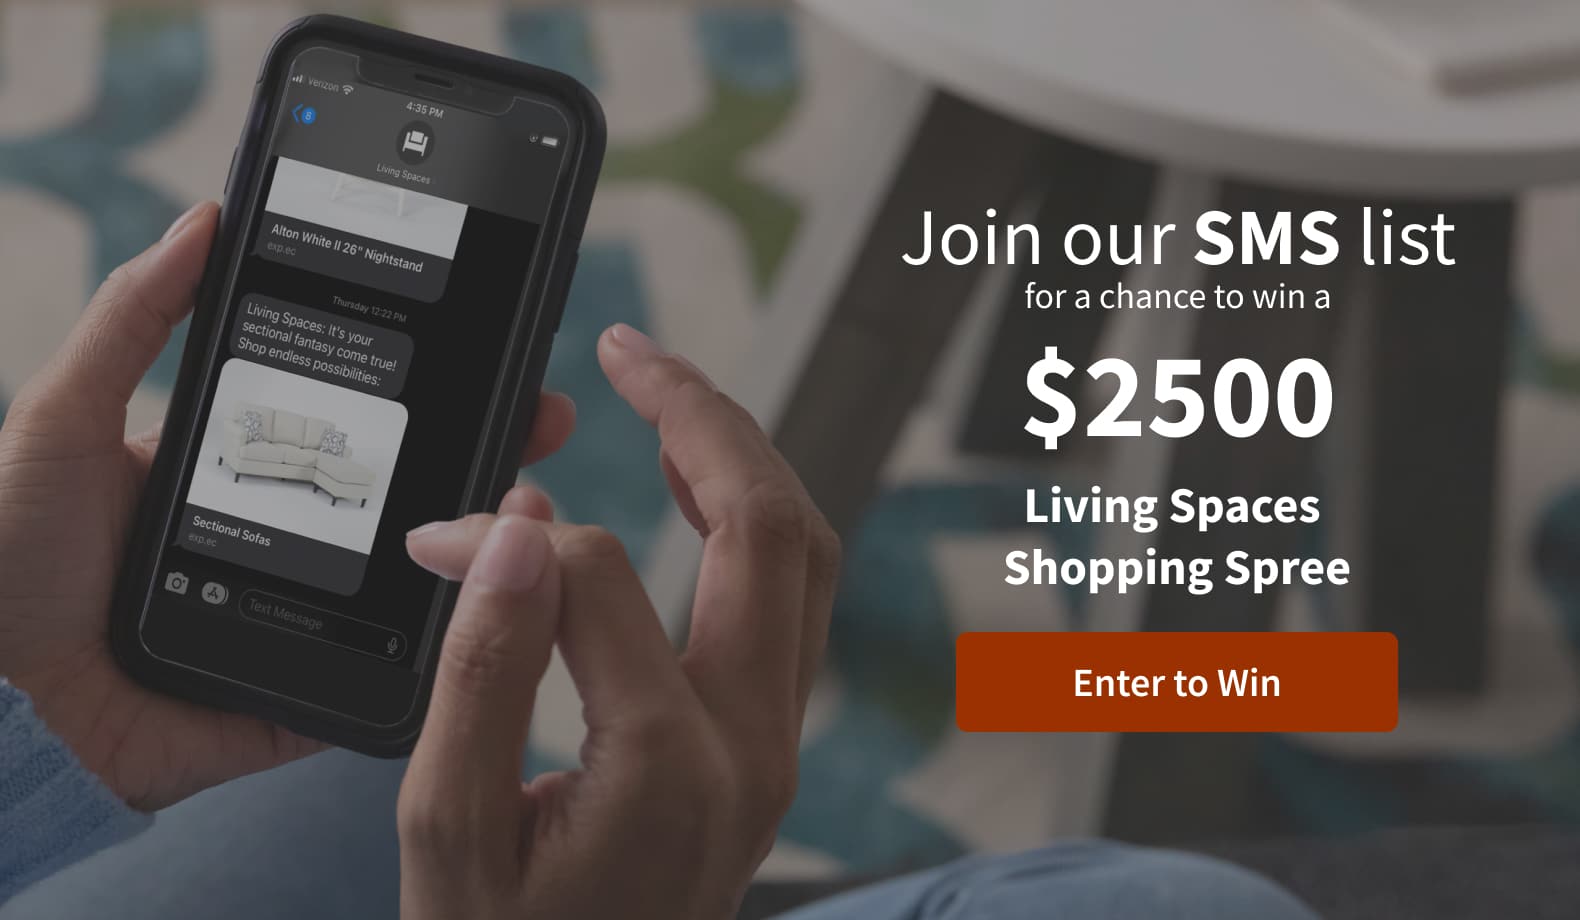 Join out SMS list for a chance to win a $2500 Living Spaces Shopping Spree. Enter to Win